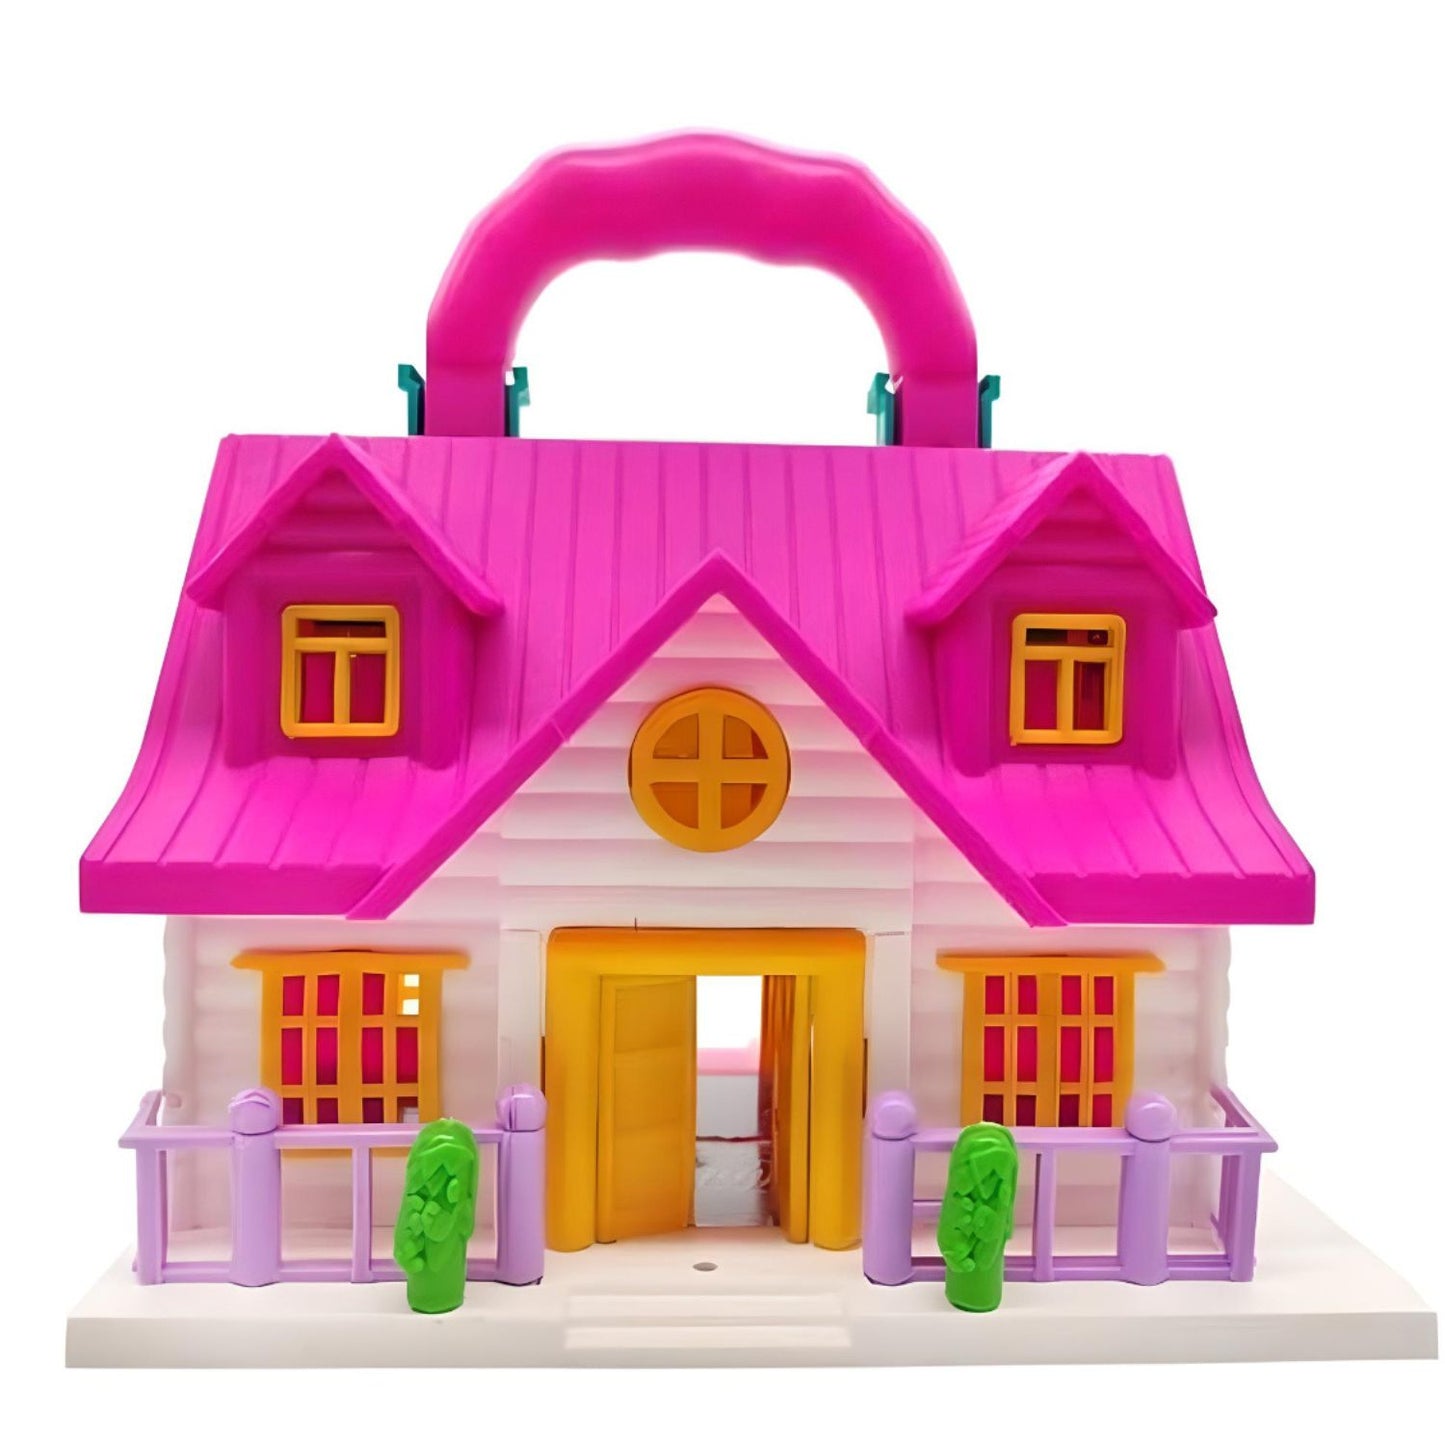 MM TOYS Small Size Funny Doll House Play Set For 2 To 6 Year Old Girls, Doll House Pretend Play Set / Toys For Girls / Birthday Gift for Girl Child